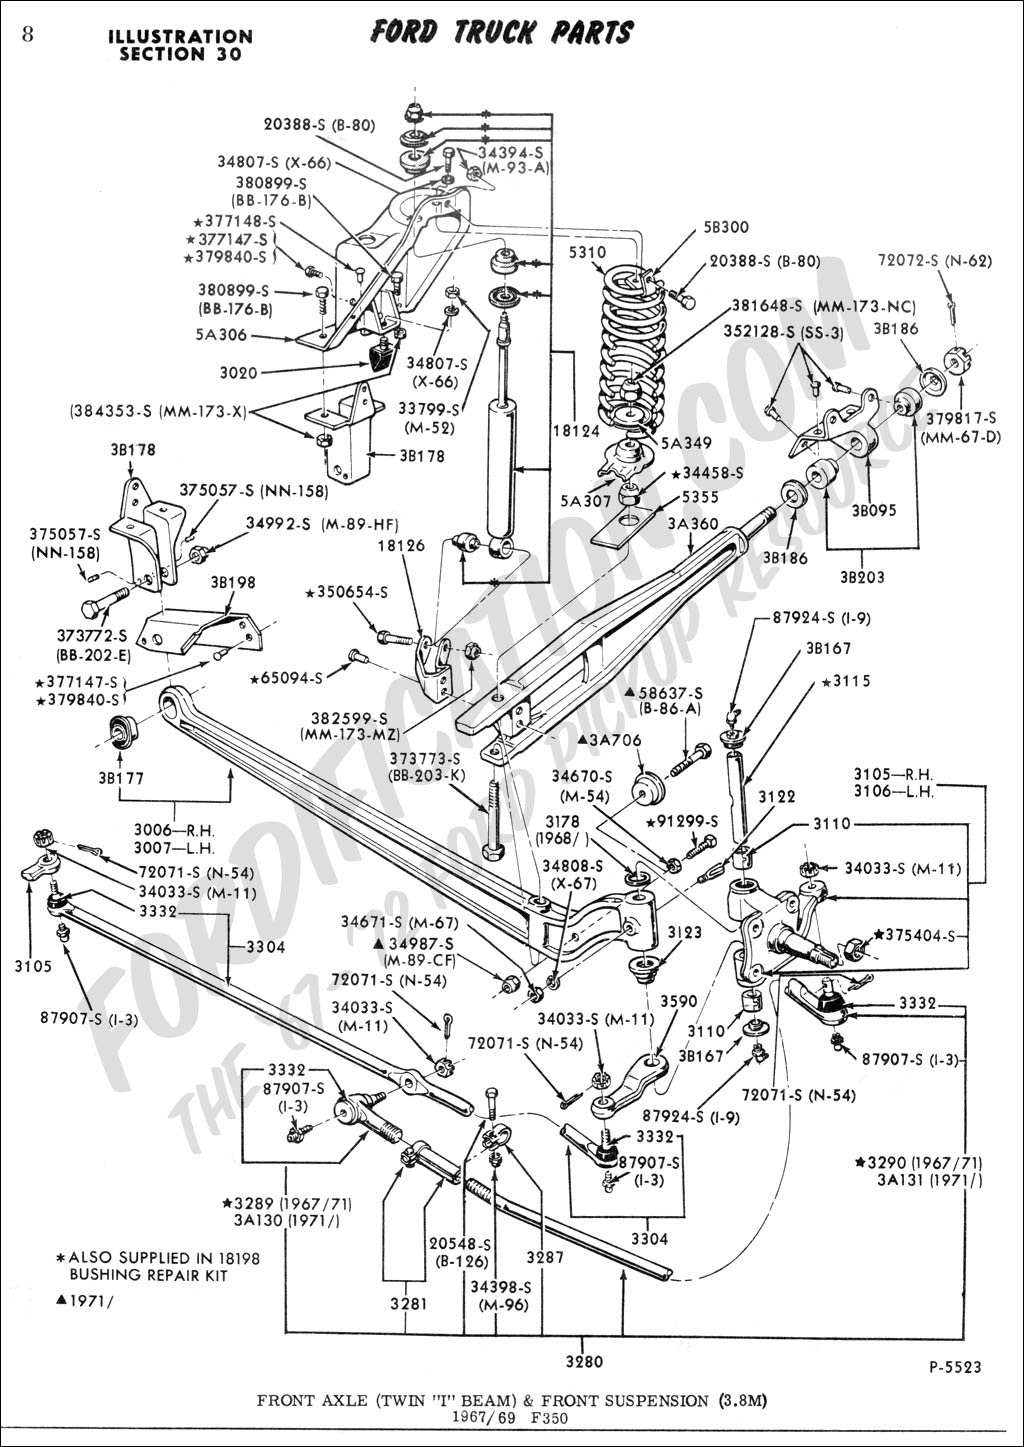 Ford F350 Front Axle Schematic